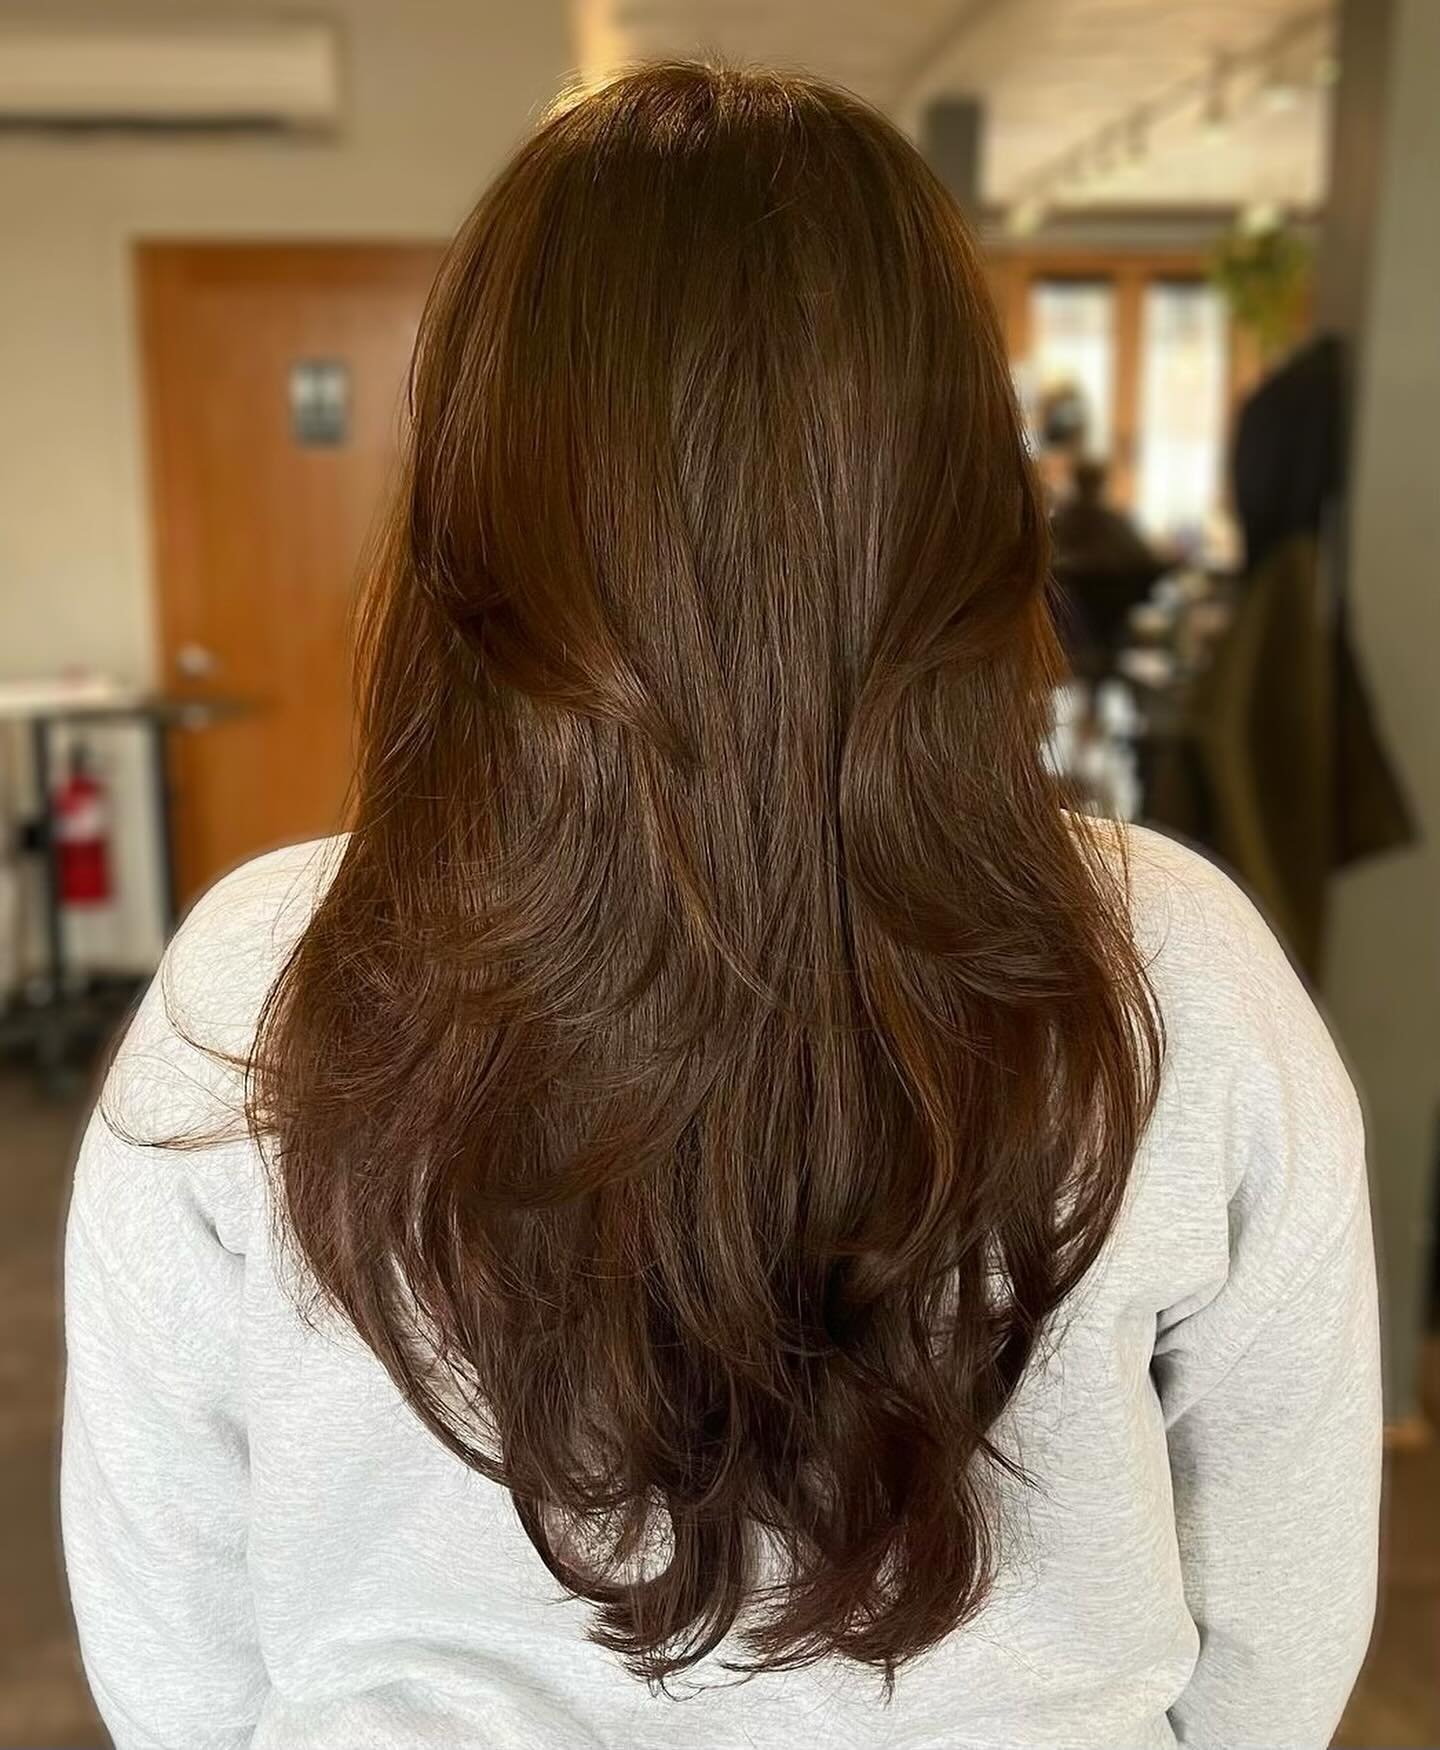 ✂️✂️✂️

Gorgeous cut by our amazing @beautybybeccaryan !!! Ready for you next trim? Use the link in our bio to get booked now! 😉

#honeyhair #honeybellingham #honeysalon #bellinghamhair #bellinghamhairstylist #davinessalon #hairsalon #bellinghamhair